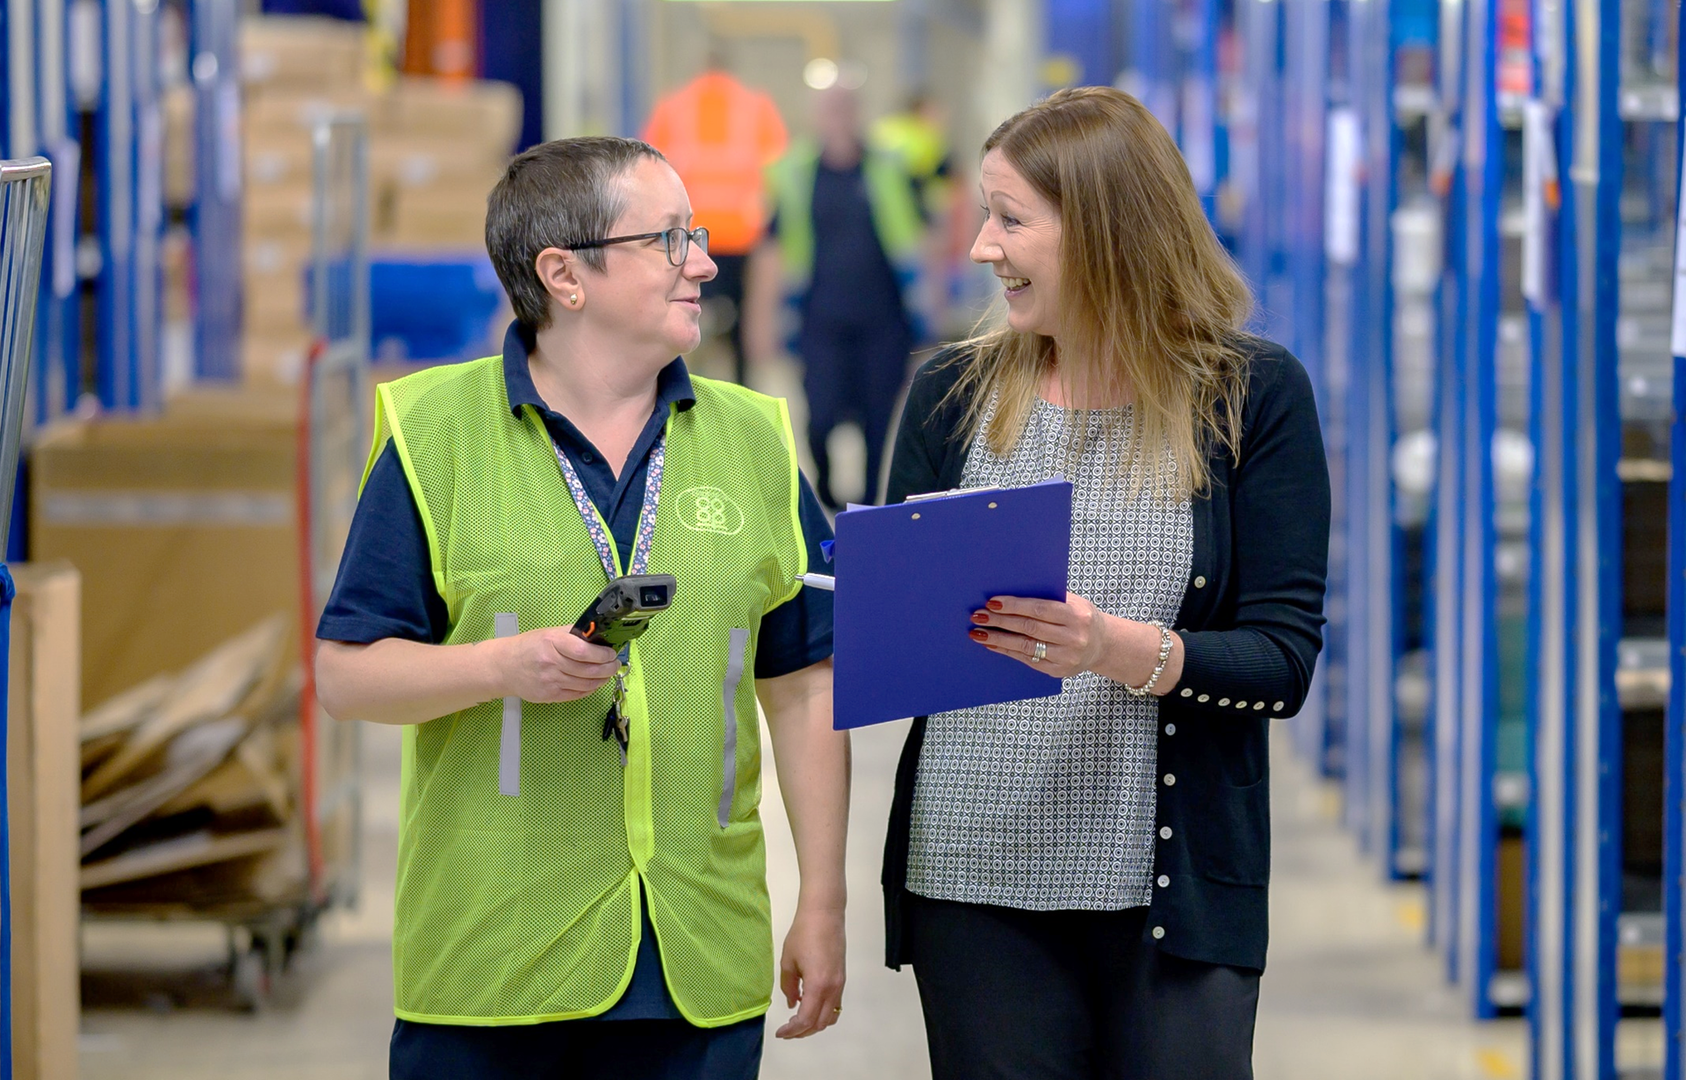 A manager and team member walking and talking in a warehouse